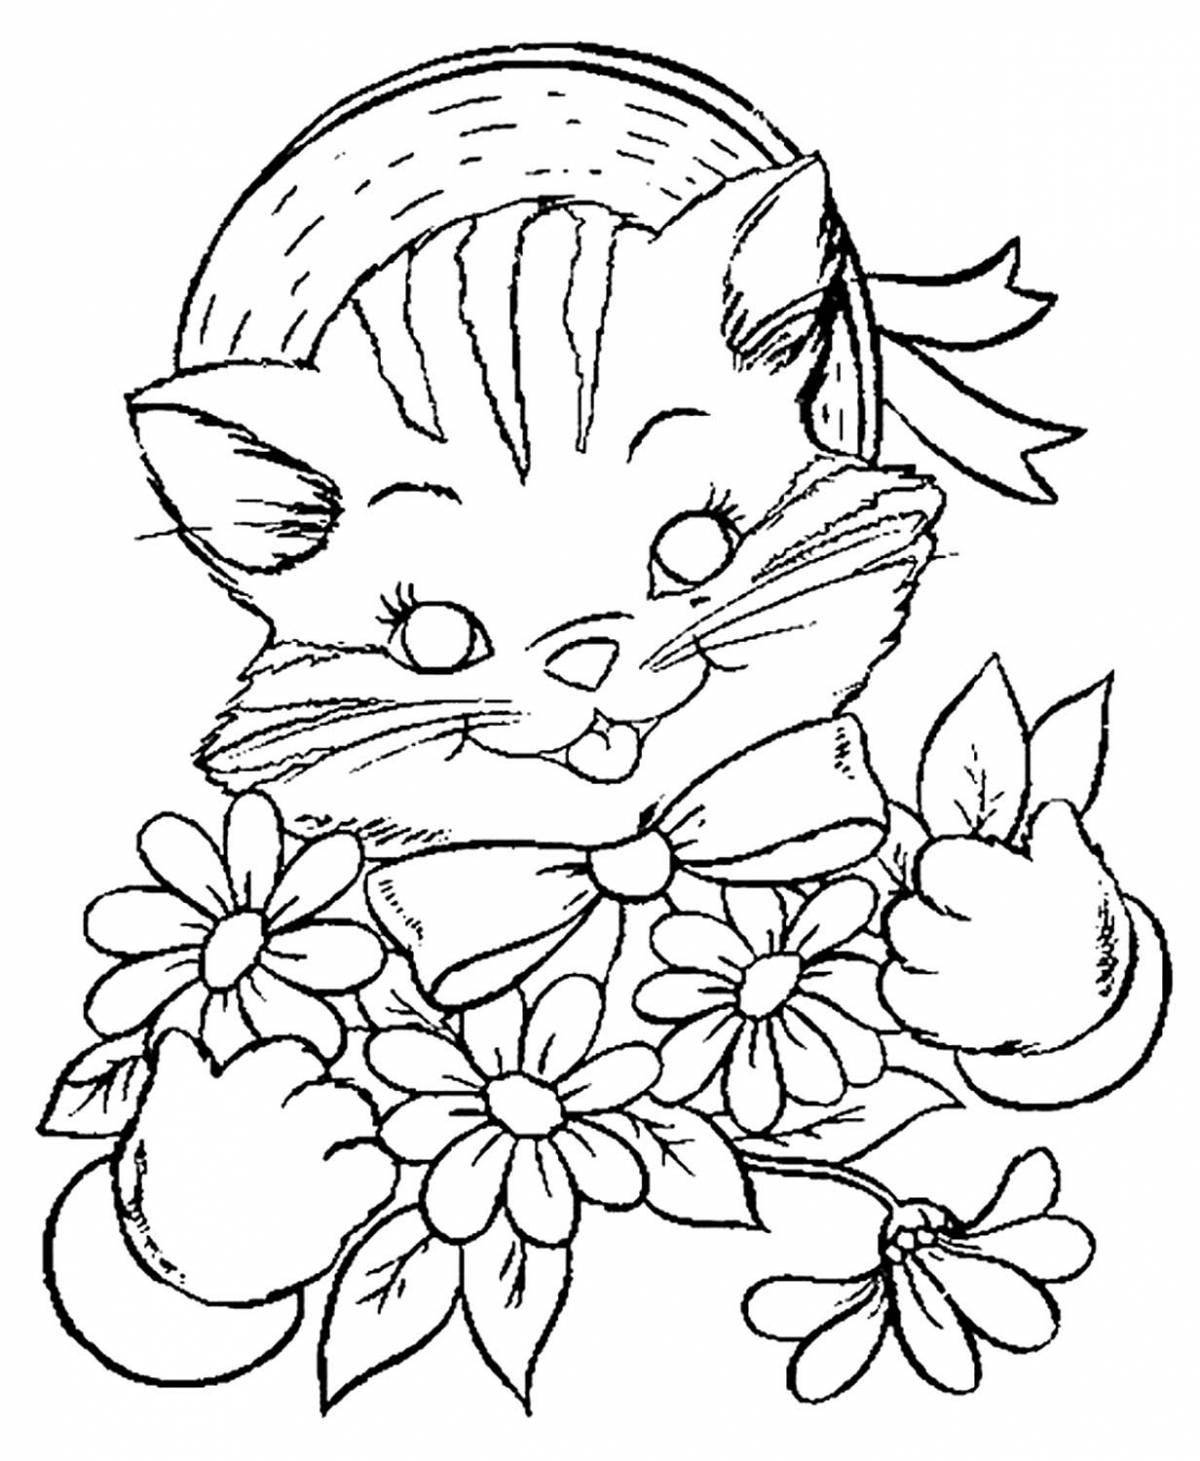 Joyful cat coloring pages for girls